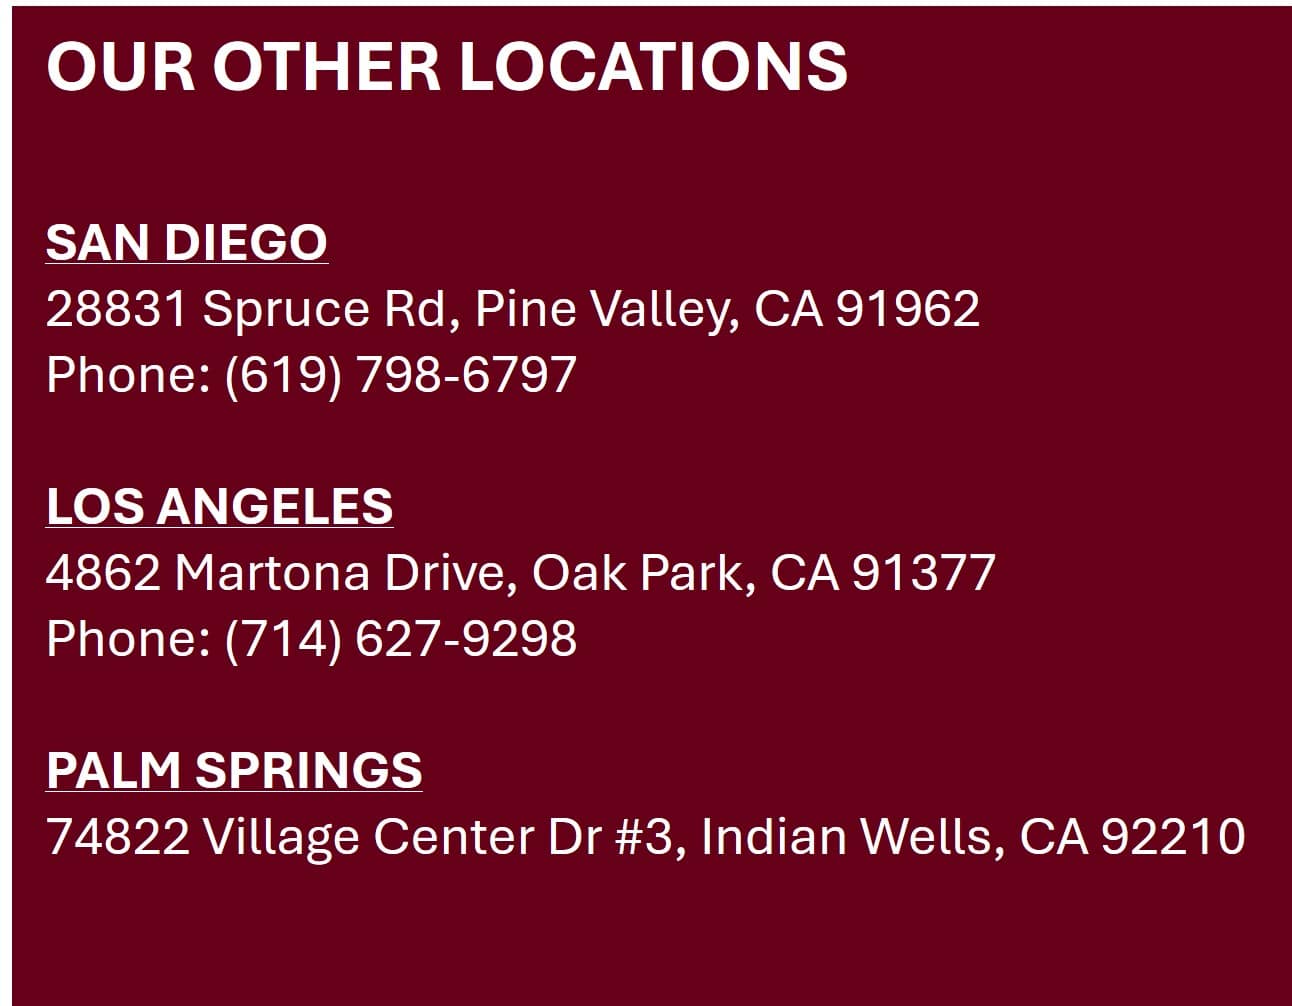 CustomWineCellar.com serves customers in Orange County and other locations in Southern Californie